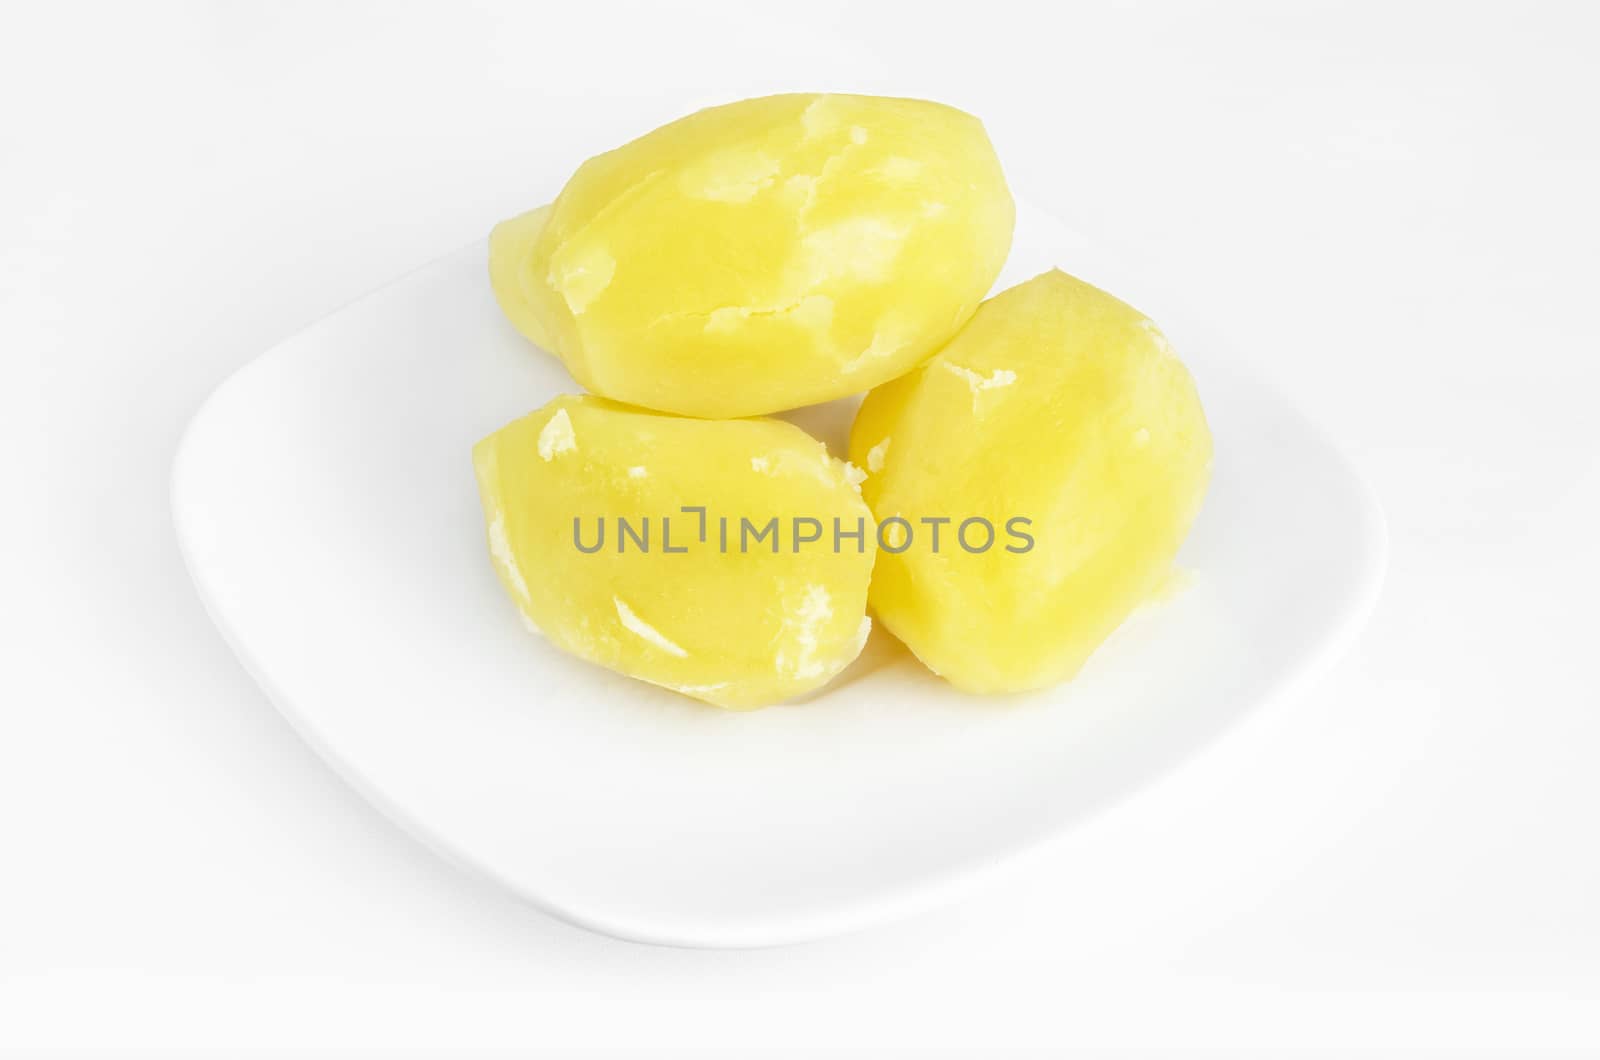 Boiled potatoes on a white background by Gaina